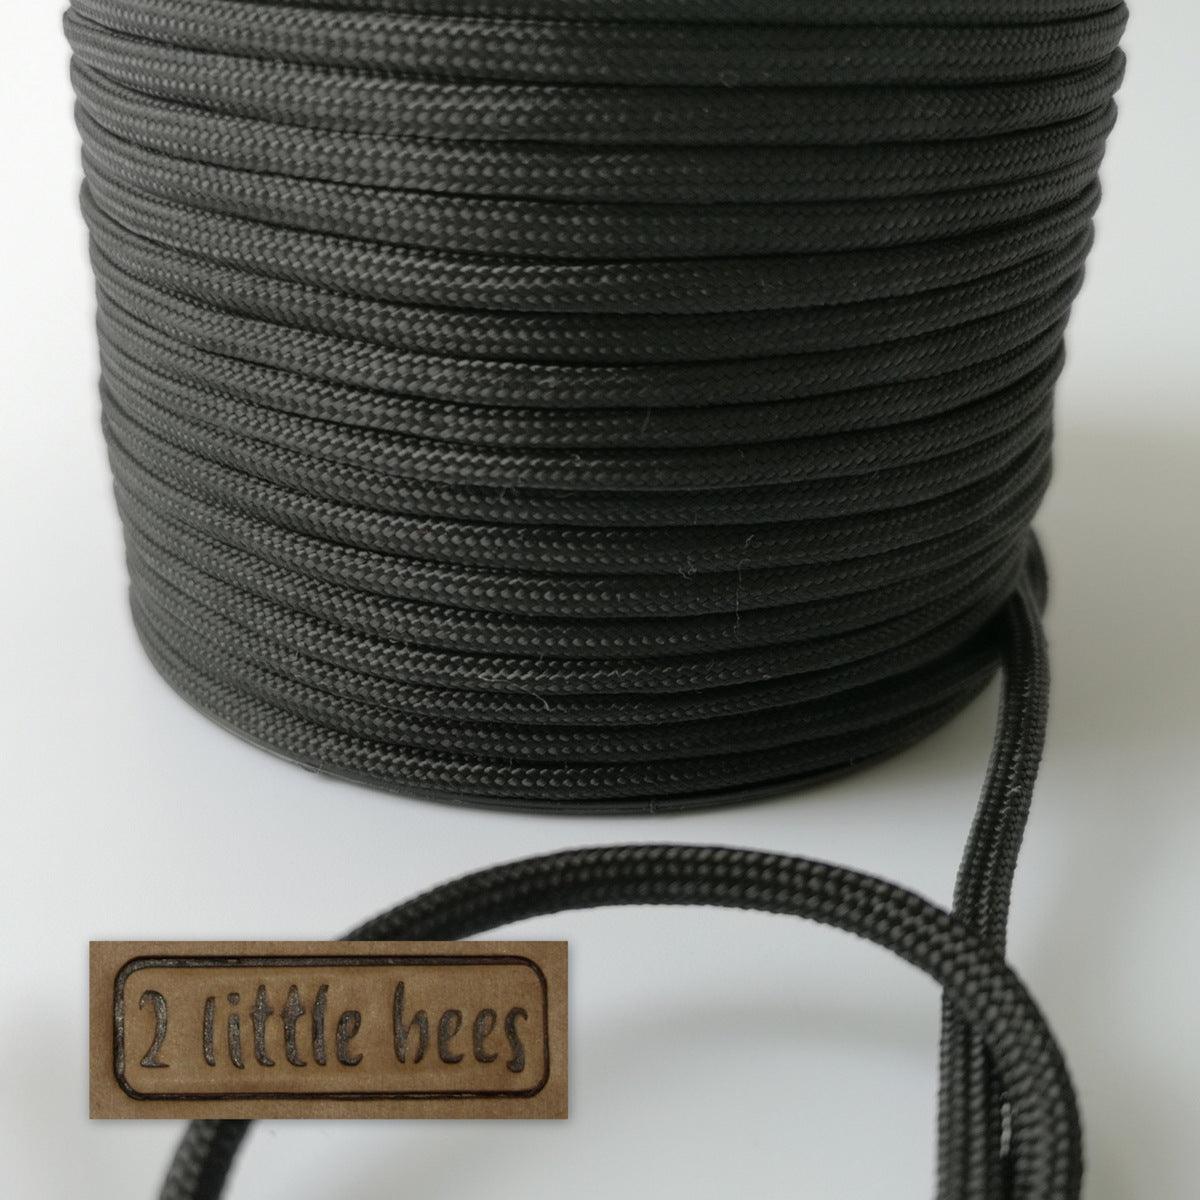 4mm Extra strong black paracord - 2 little bees